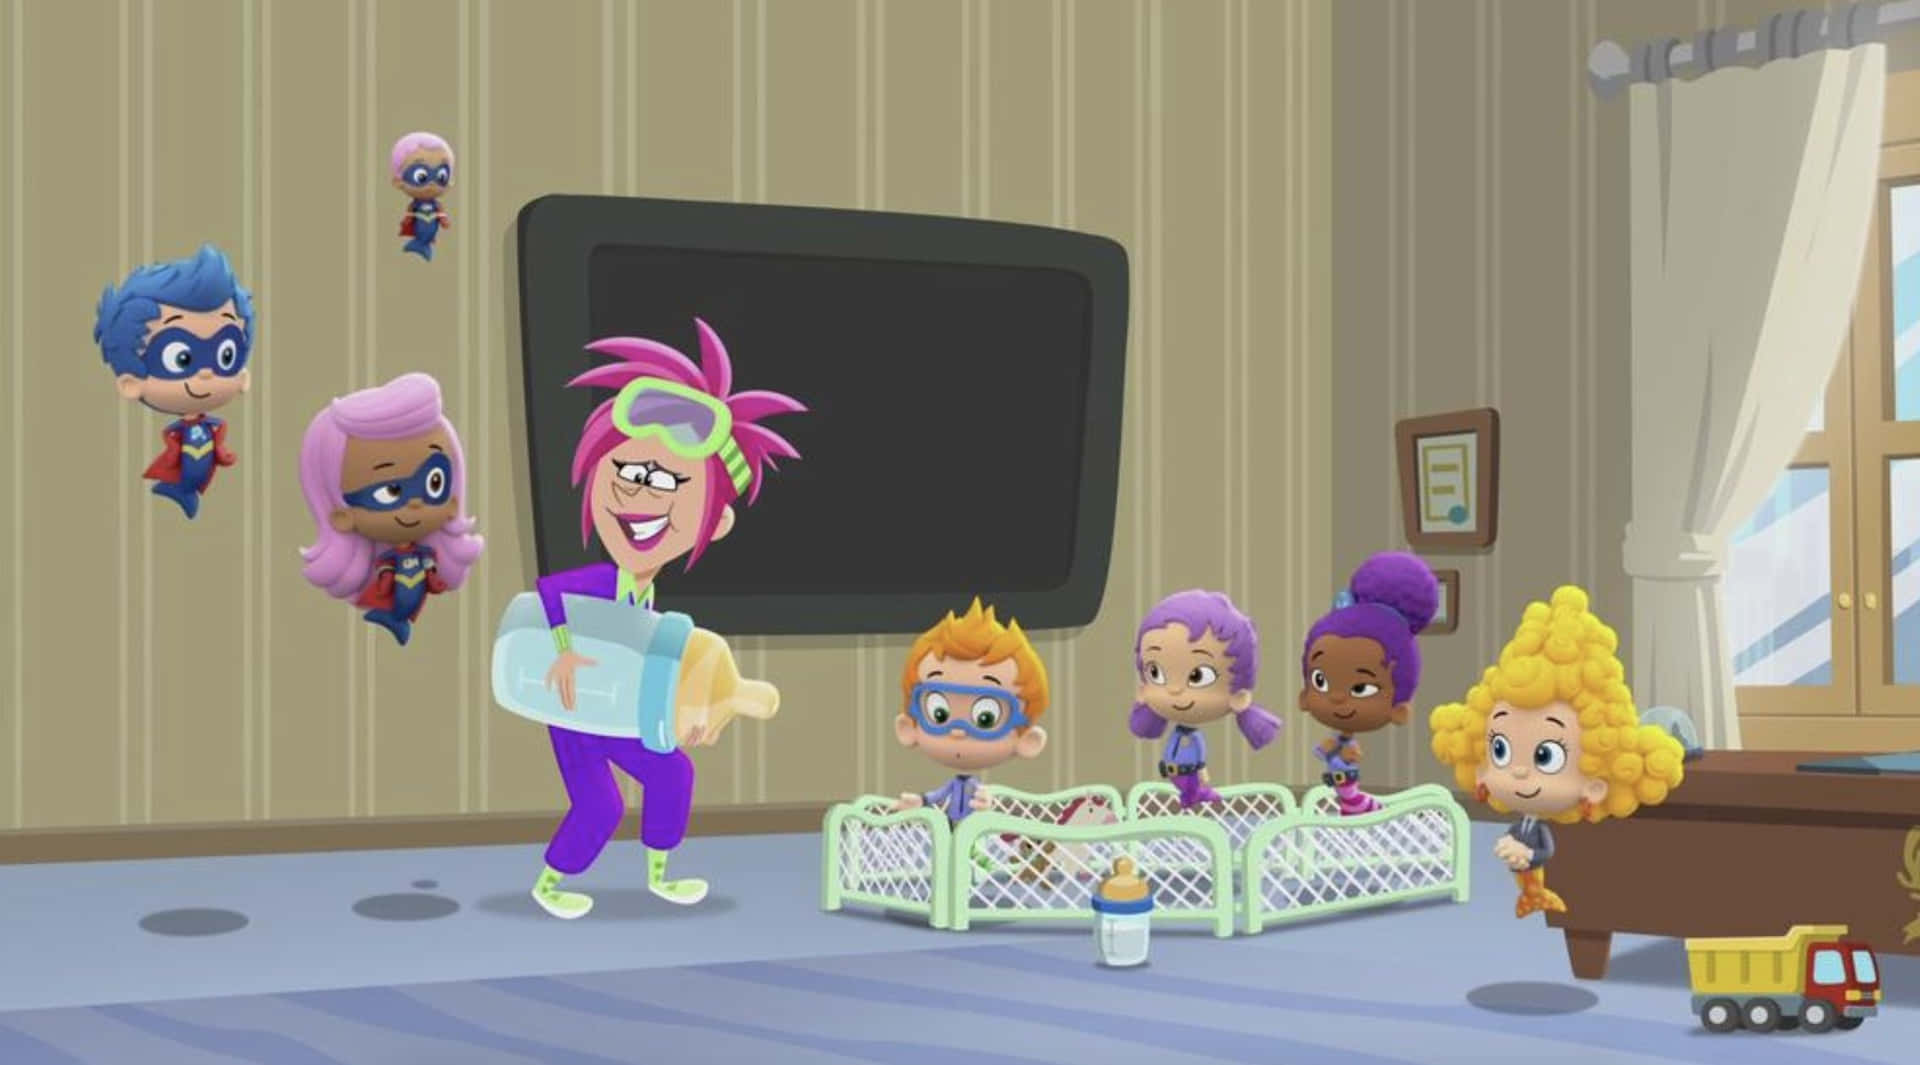 Join the Bubble Guppies on their adventures!